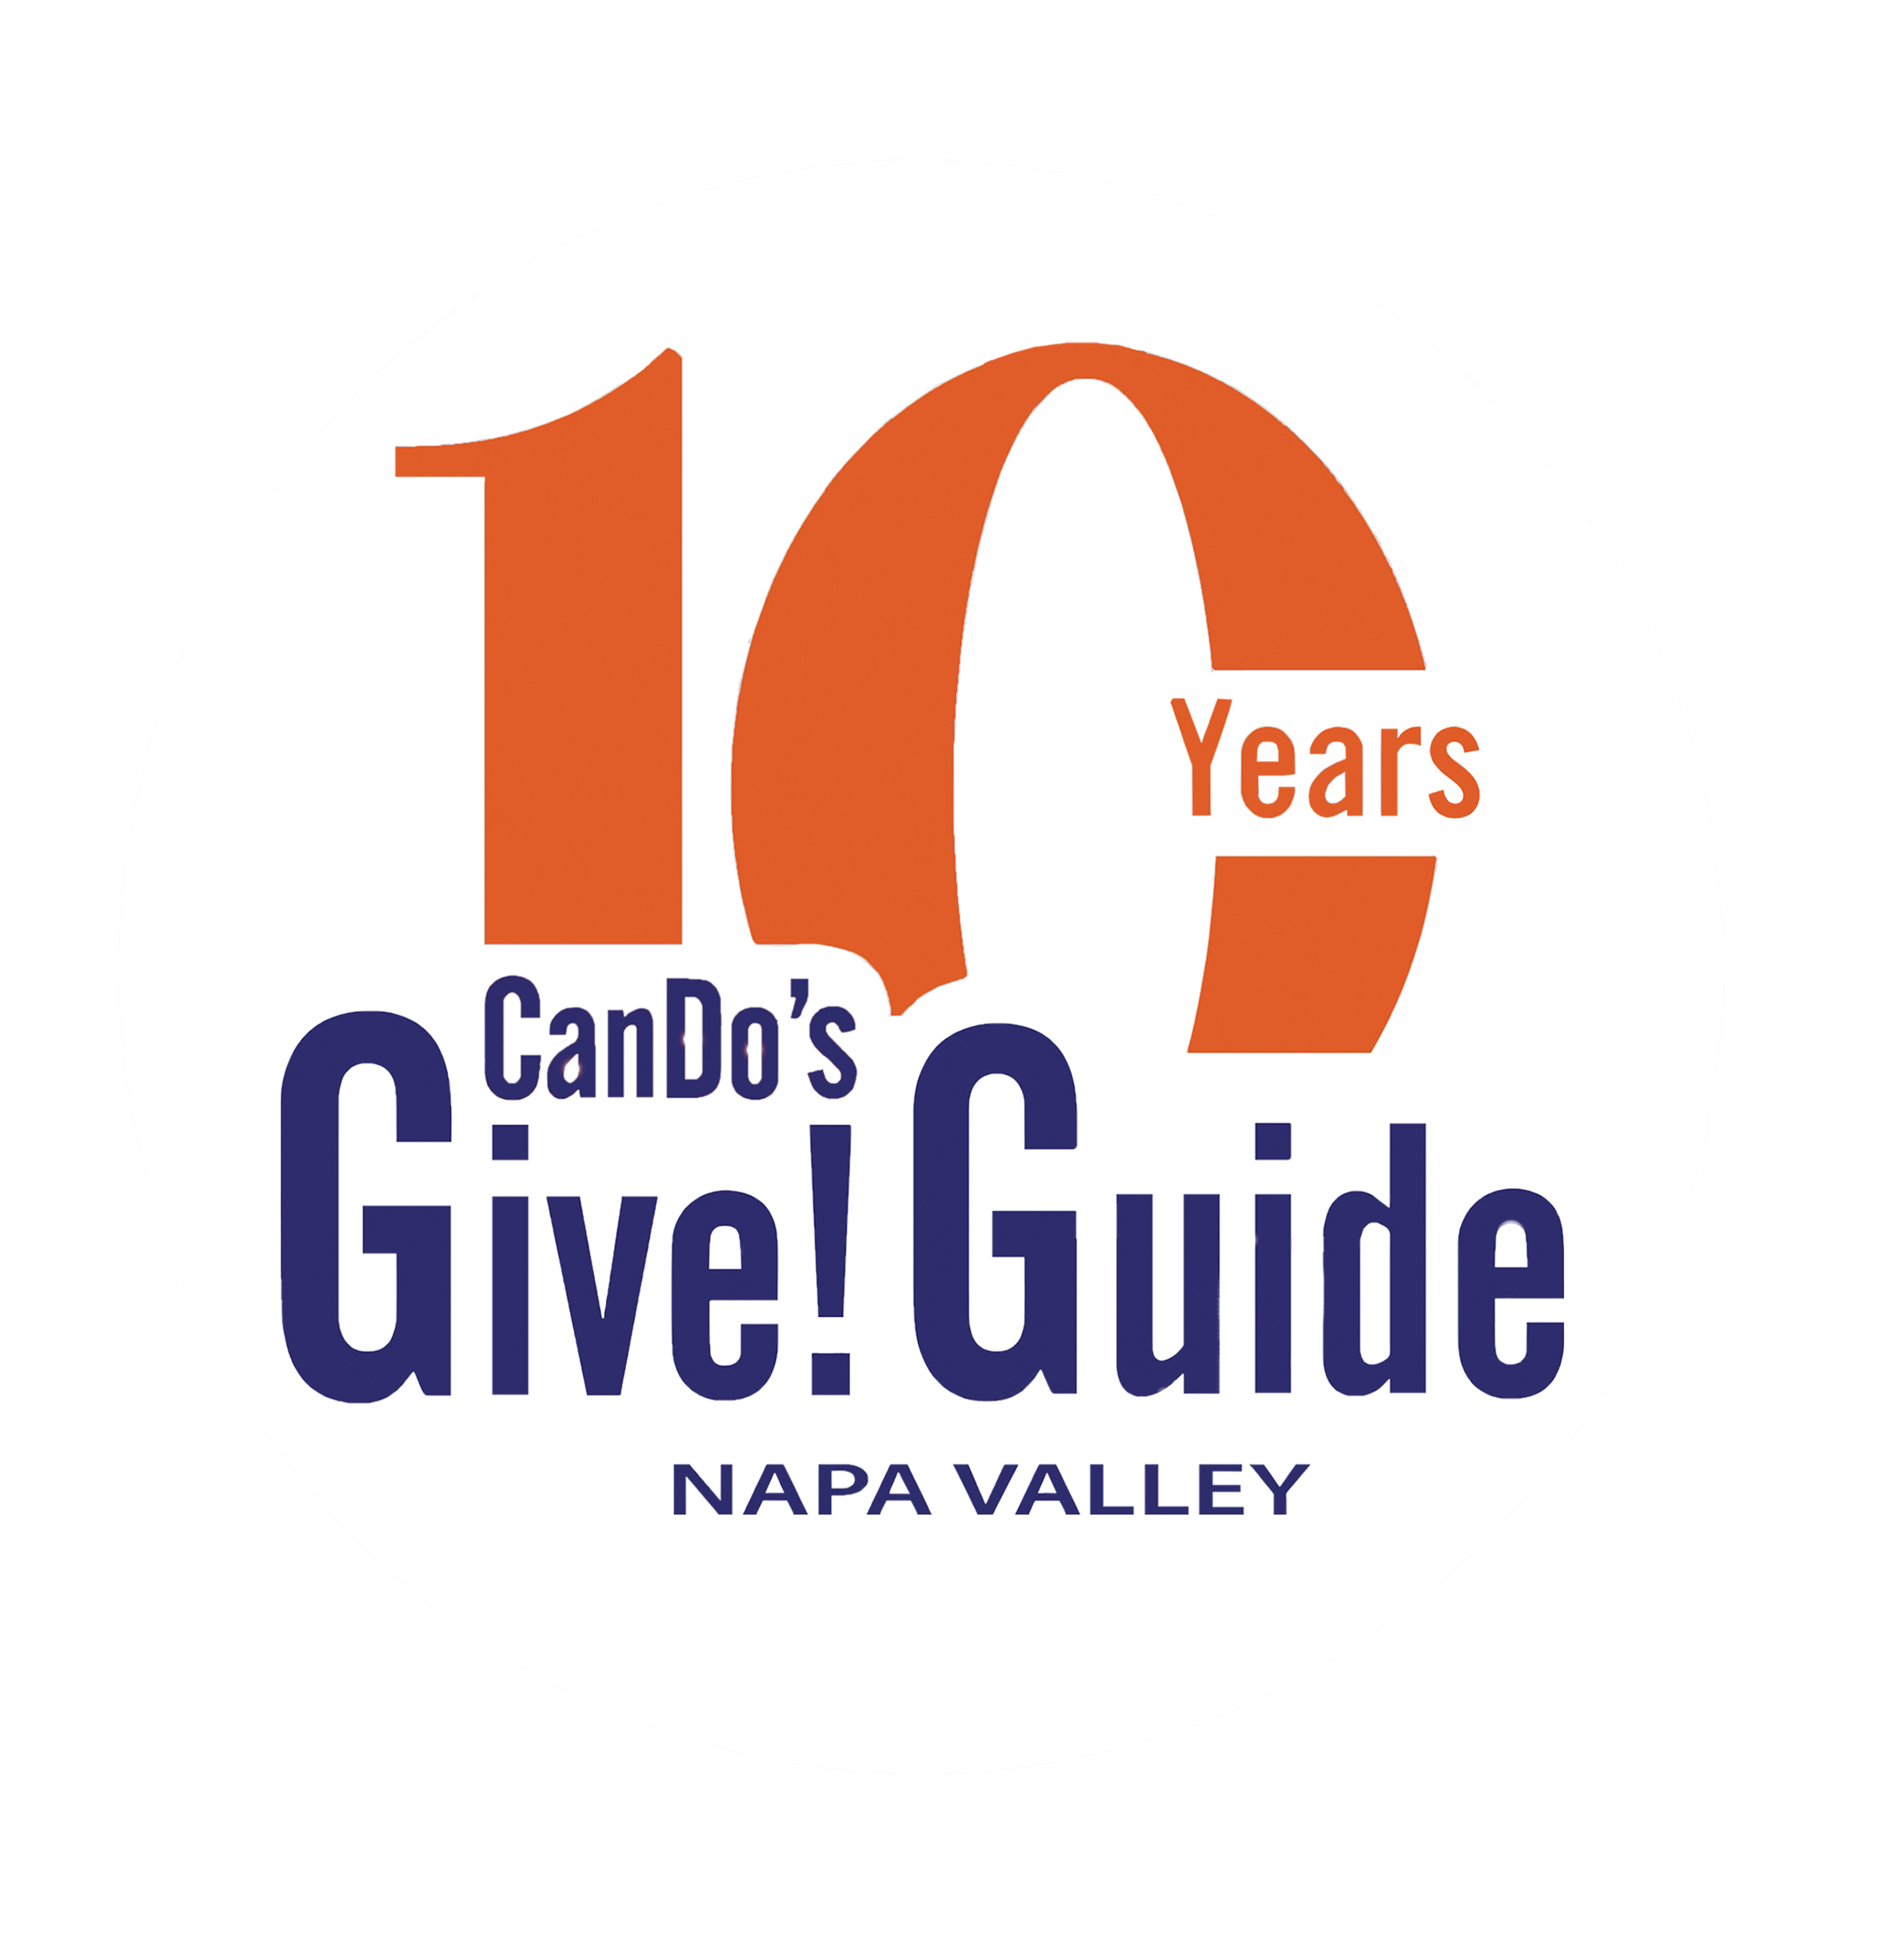 Members of the community can further support RAD by donating via CanDo’s Napa Valley Give!Guide, which raises awareness and funds in support of exceptional nonprofits serving Napa County.